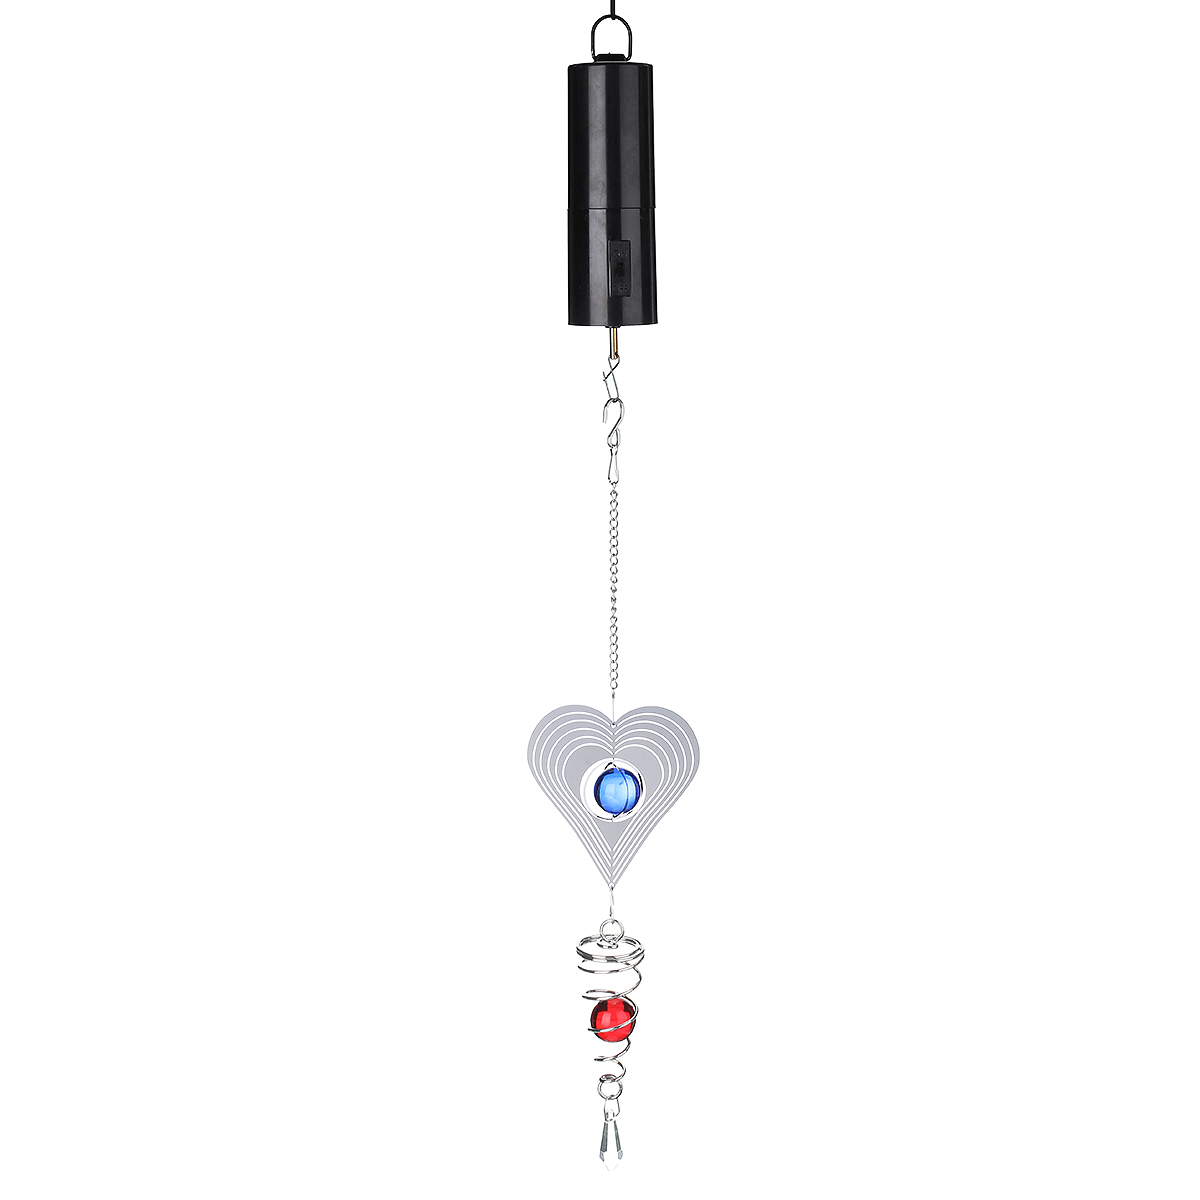 3D-Metal-Hanging-Wind-Spinner-Wind-Chime-with-H-elix-Tail-Glass-Ball-Center-Decorations-1535718-6